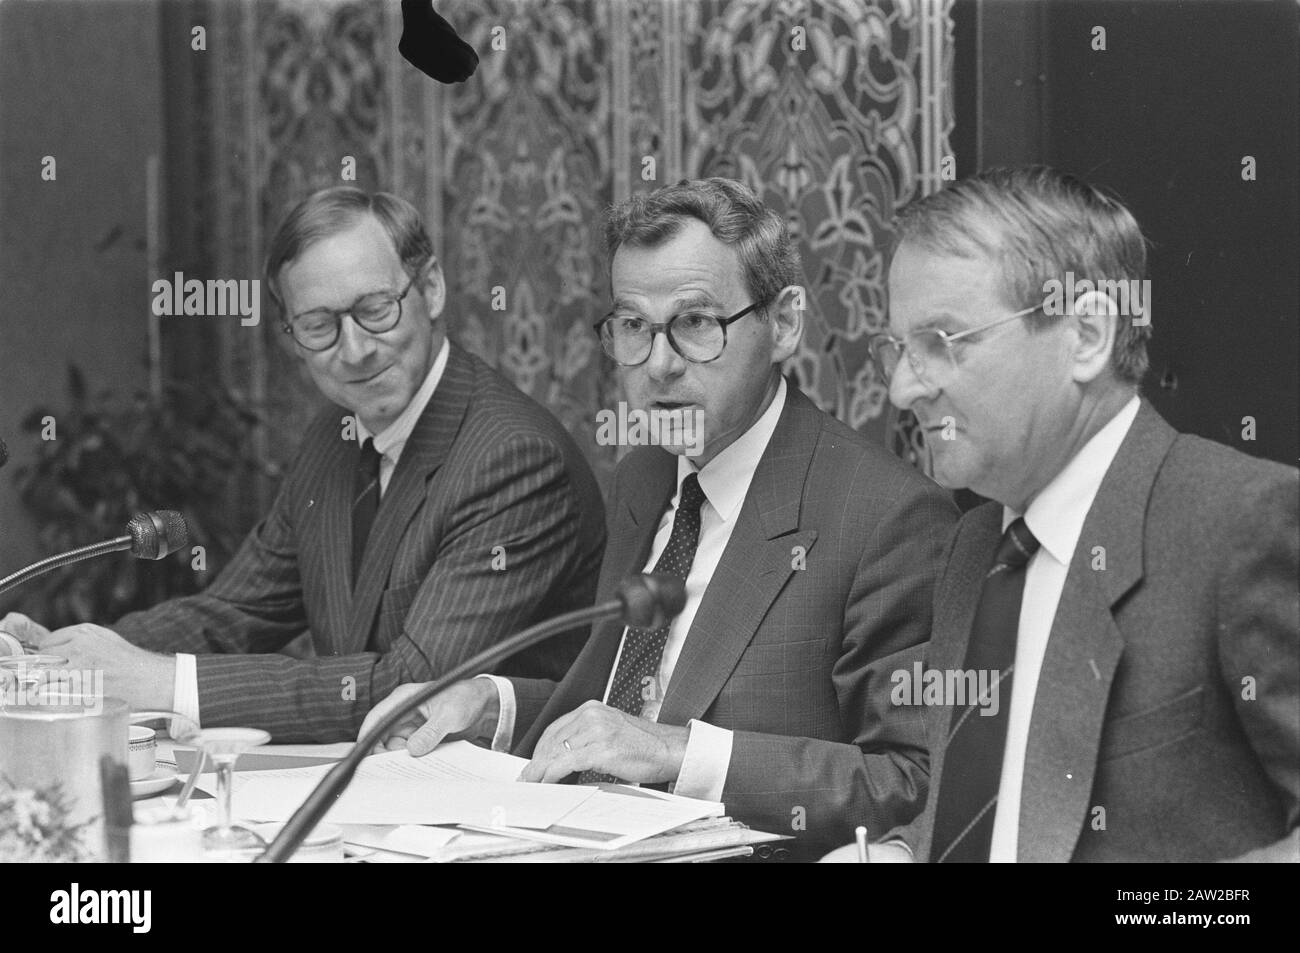 AKZO press conference on results first half 1984; v.l.n.r. drs F. Hensel, Dr. S. Bergsma and JH Katgert Date:.. 13 August 1984 Keywords: press conferences Person Name: AKZO, JH Katgert, Dr. S. Bergsma Stock Photo